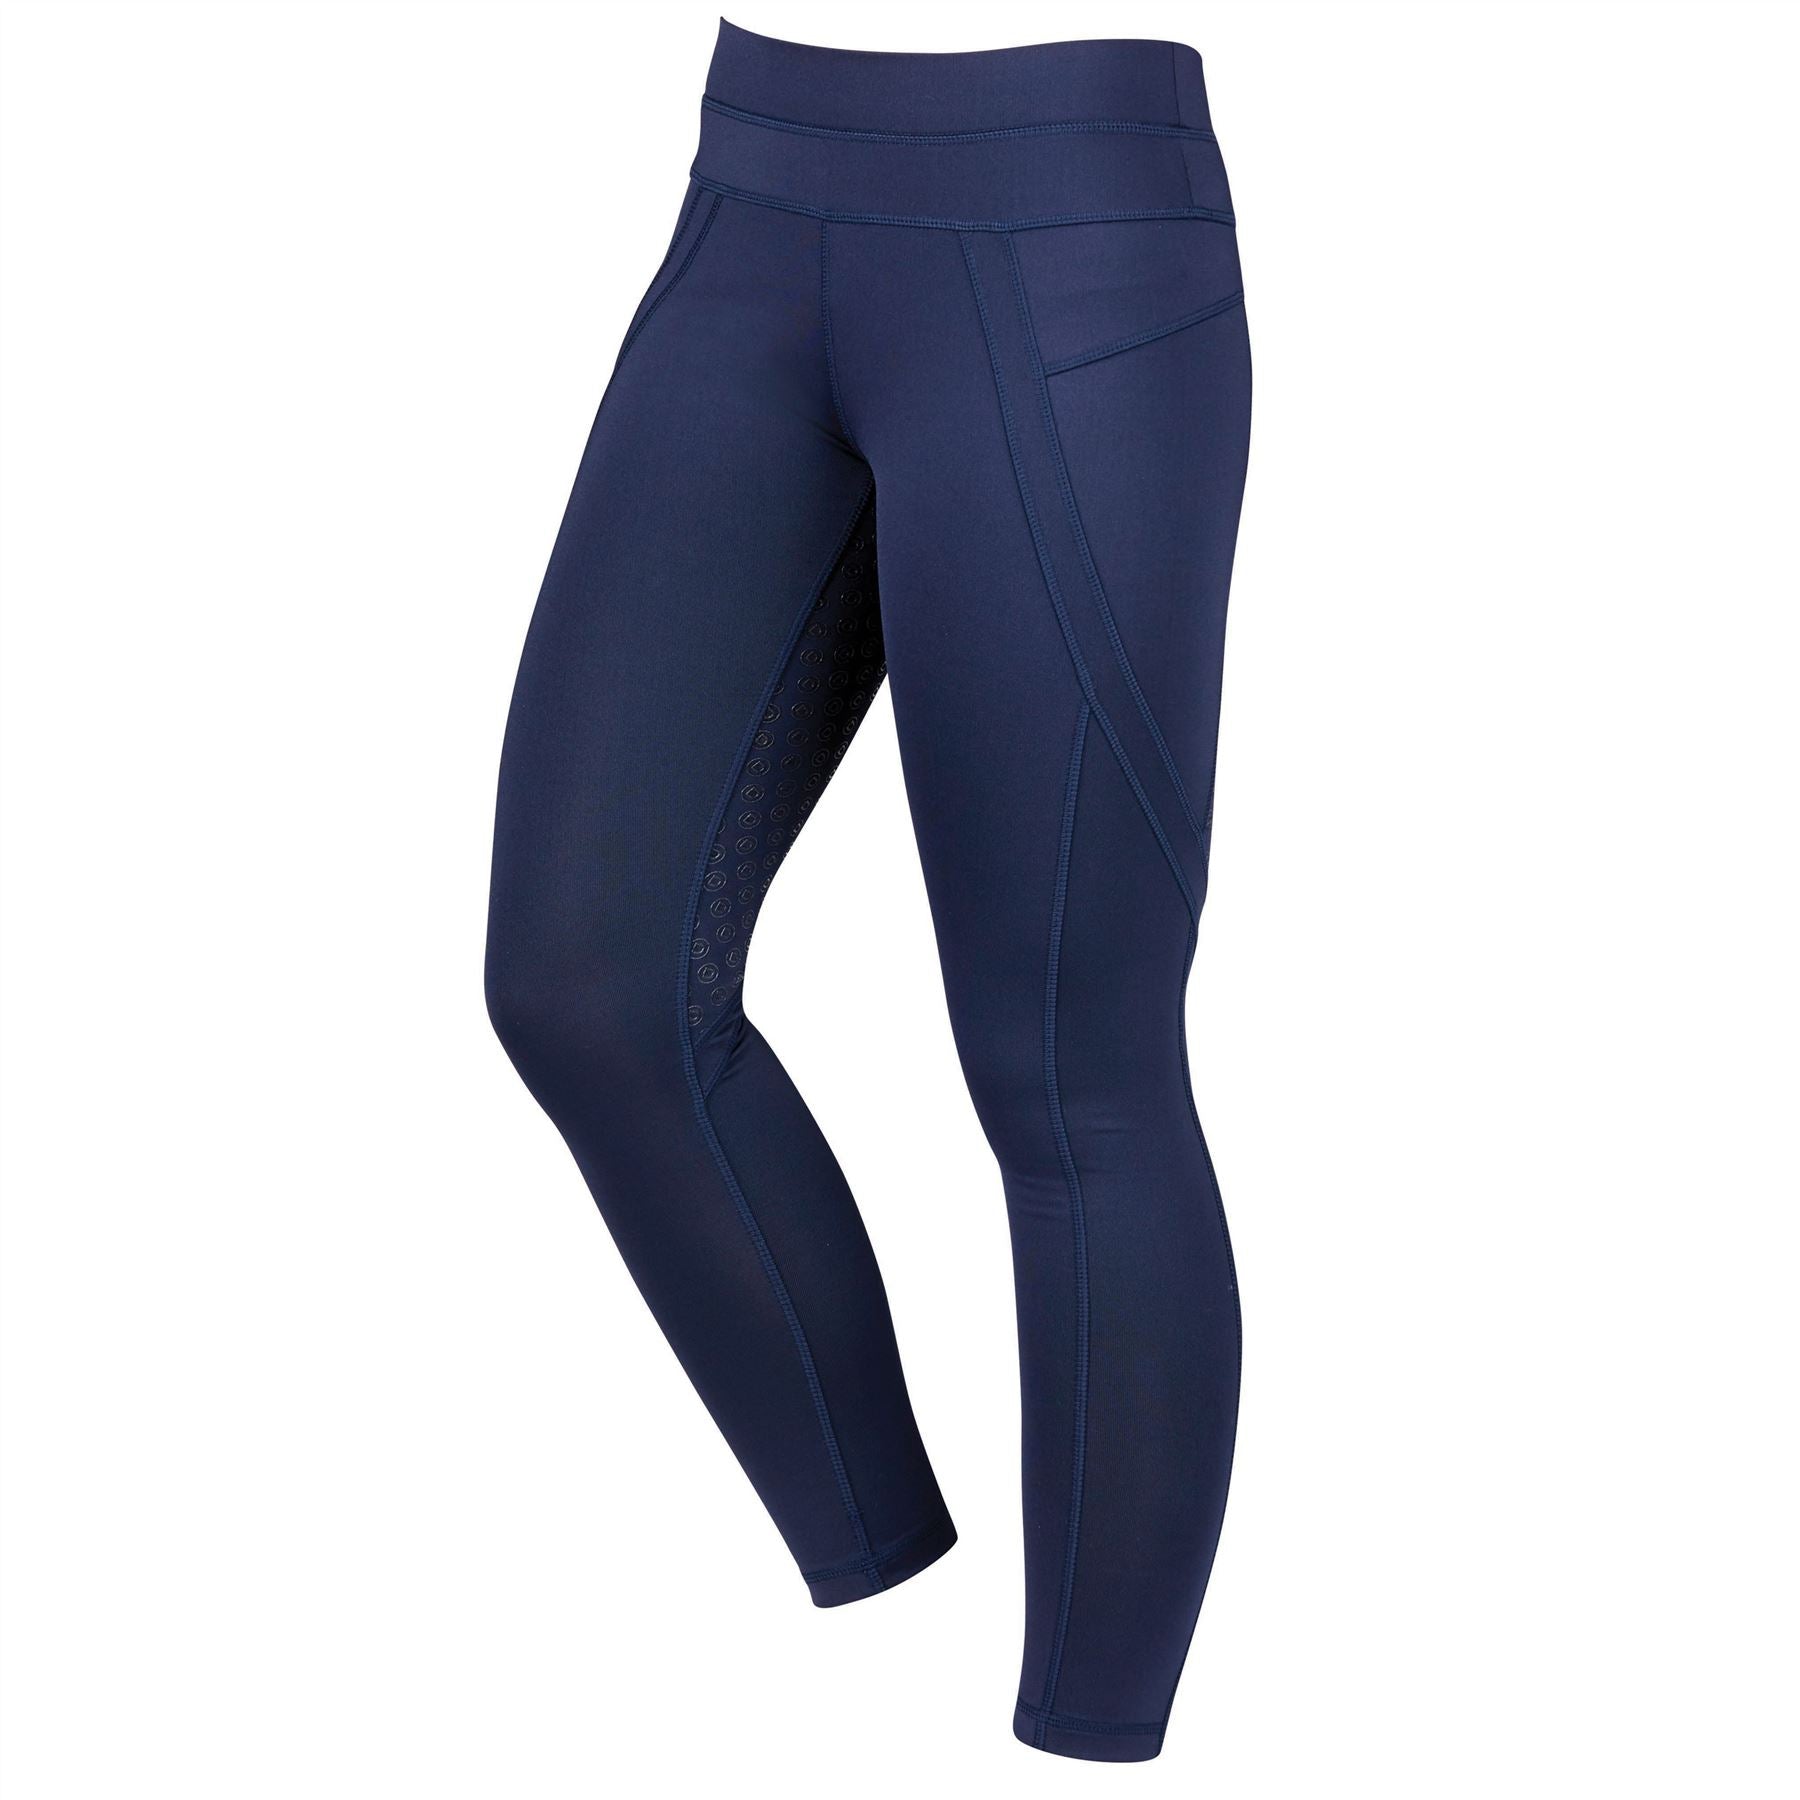 Dublin Performance Active Tights - Just Horse Riders